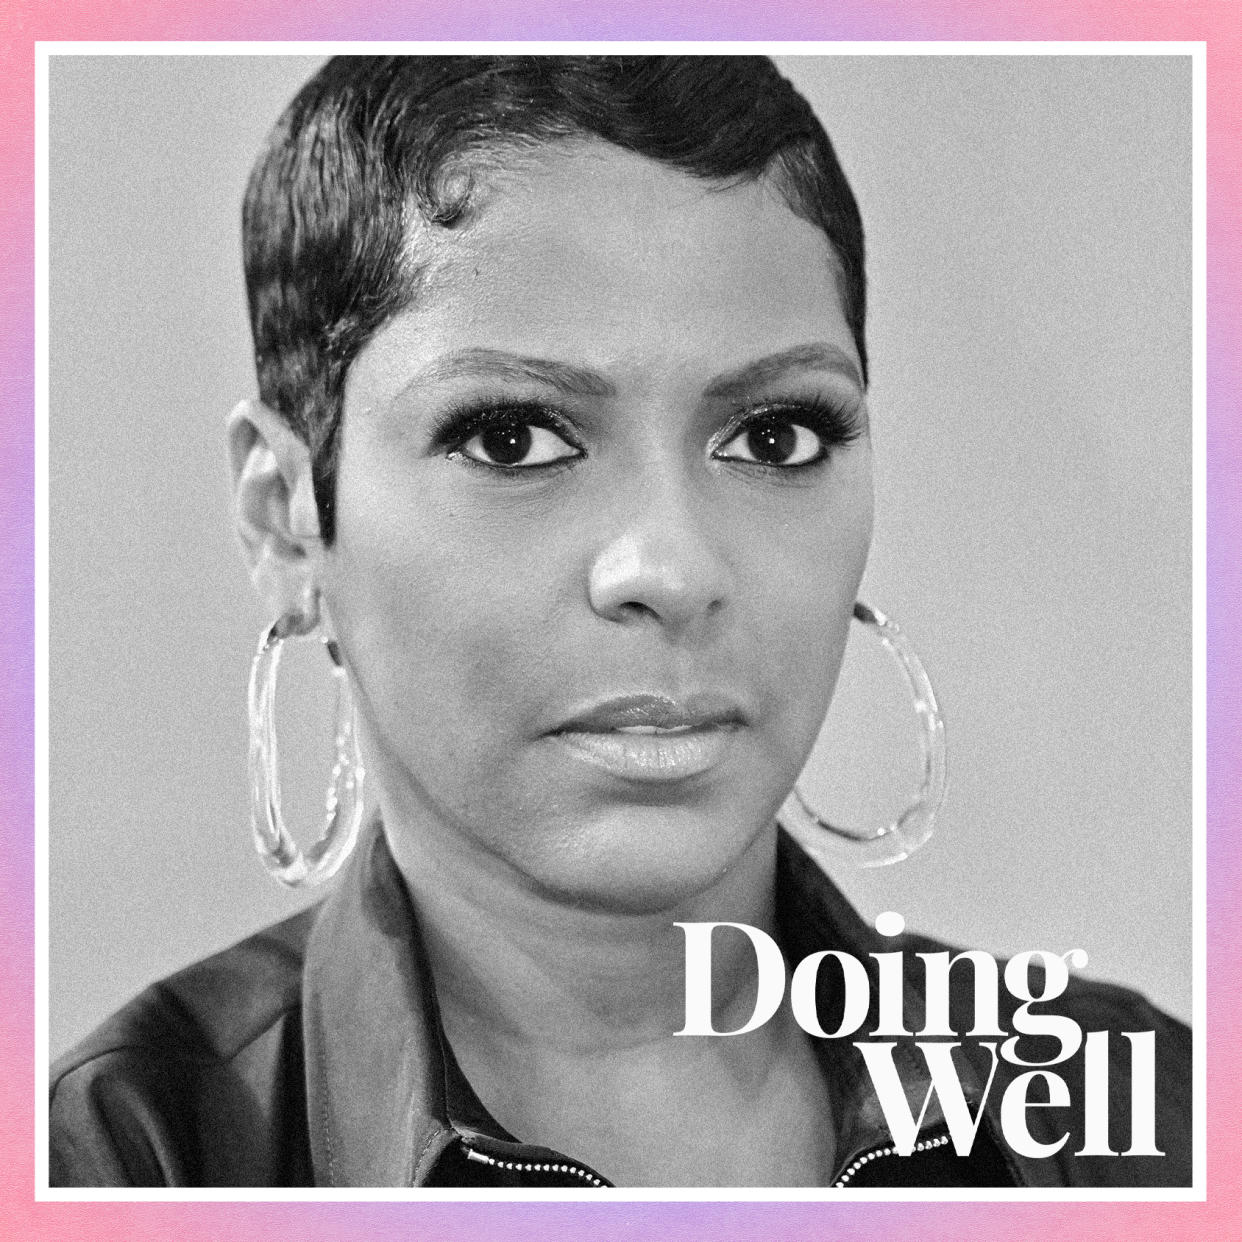  Black and white photo of Tamron Hall with copy that says "Doing Well". 